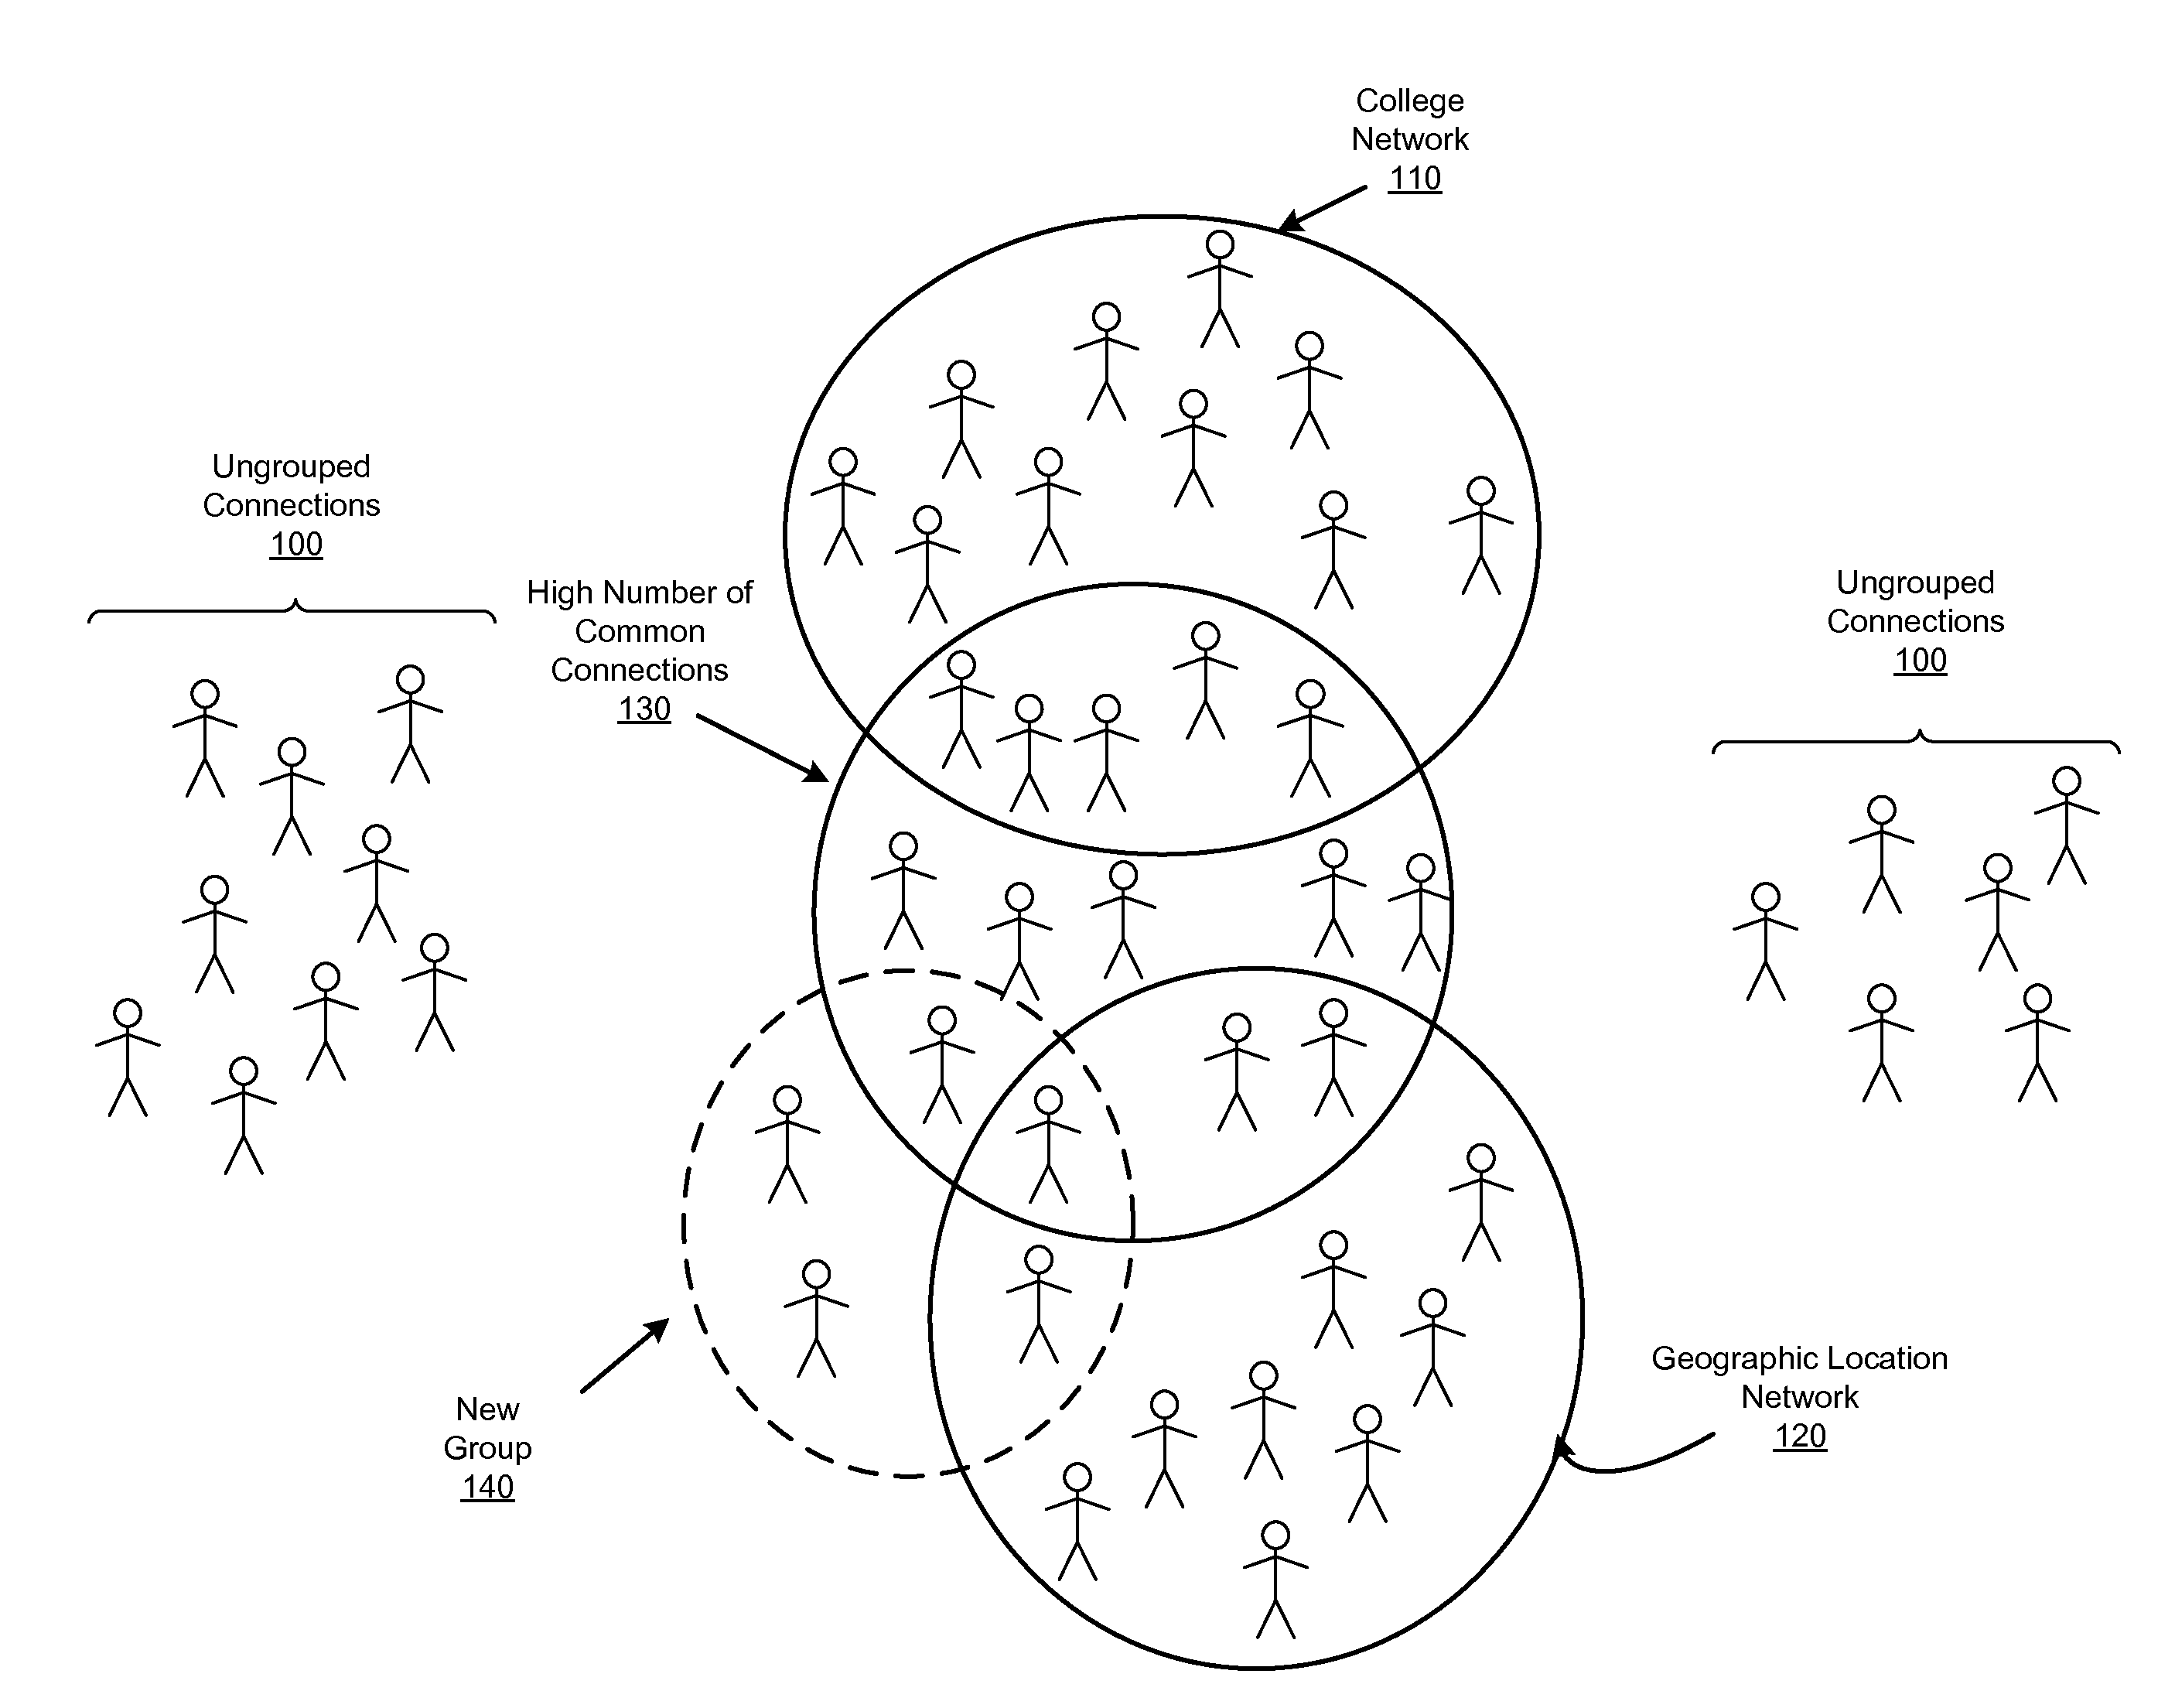 Creating groups of users in a social networking system